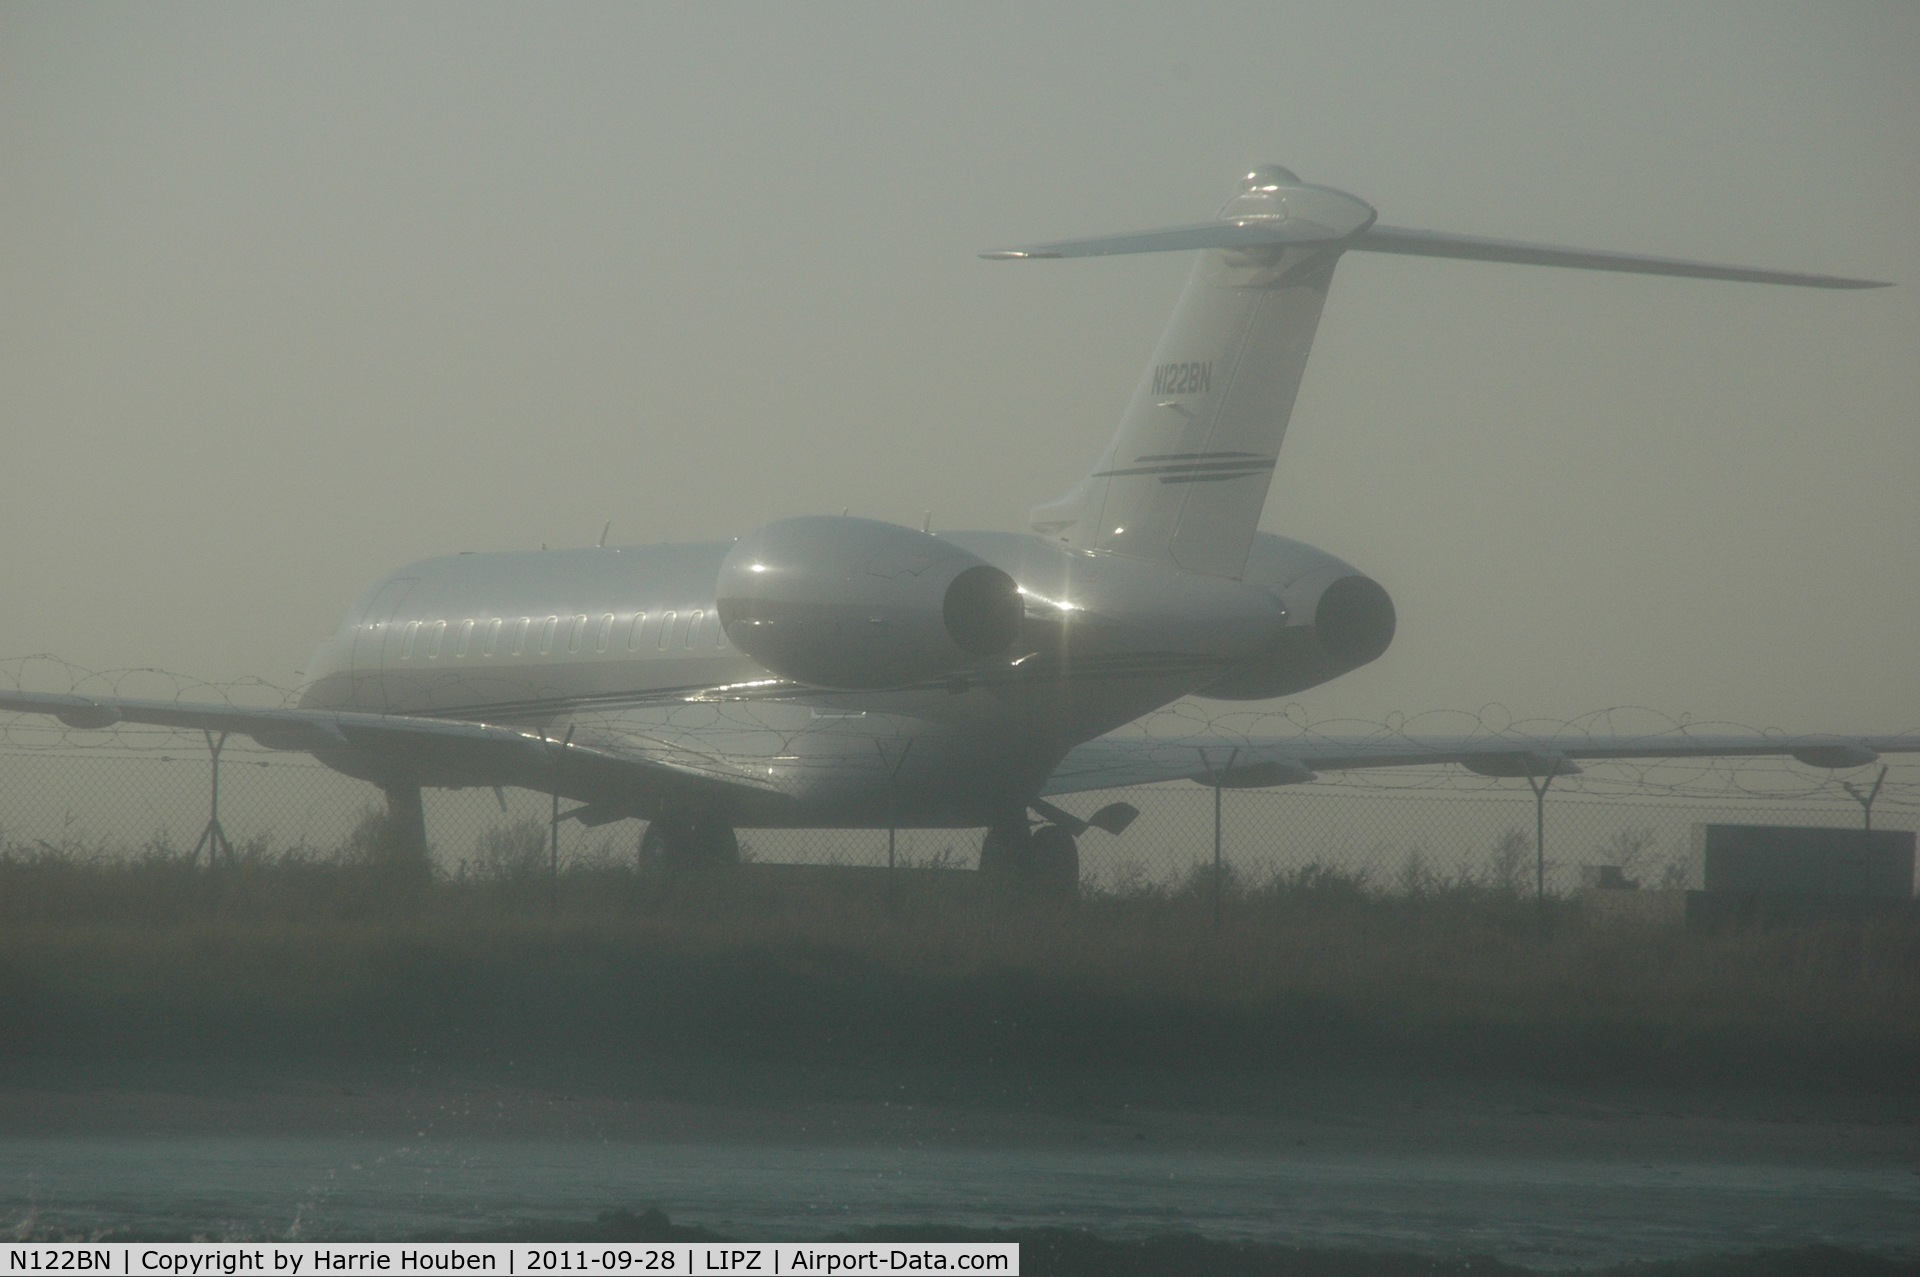 N122BN, 2001 Bombardier BD-700-1A10 Global Express C/N 9103, in the early morning light